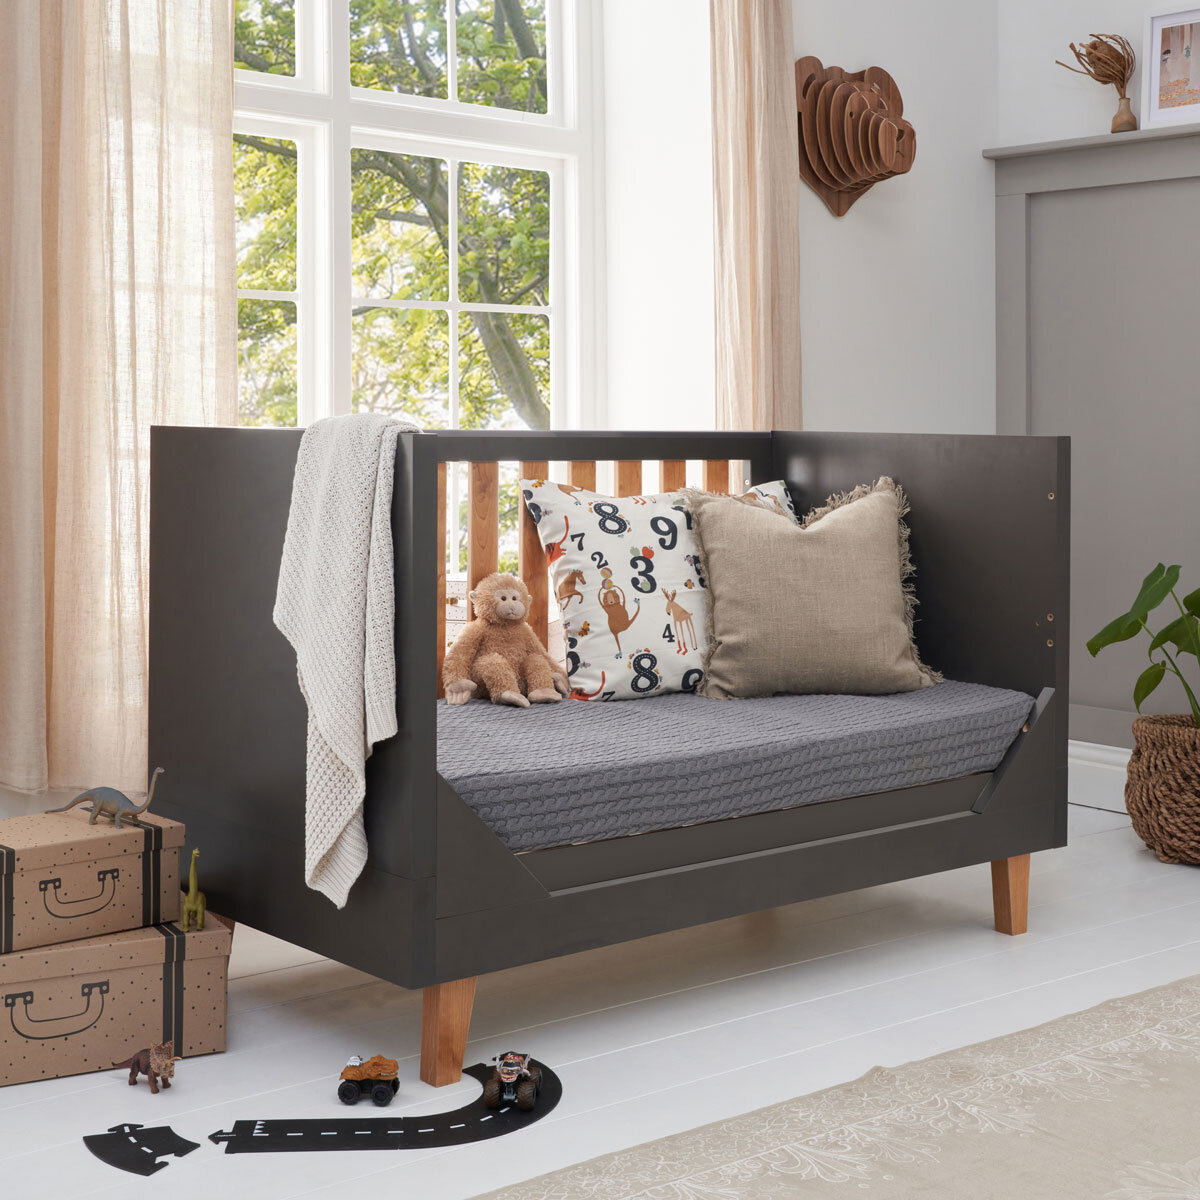 Tutti Bambini Como Cot 4 Piece Room Set, Slate Grey and Rosewood Cot